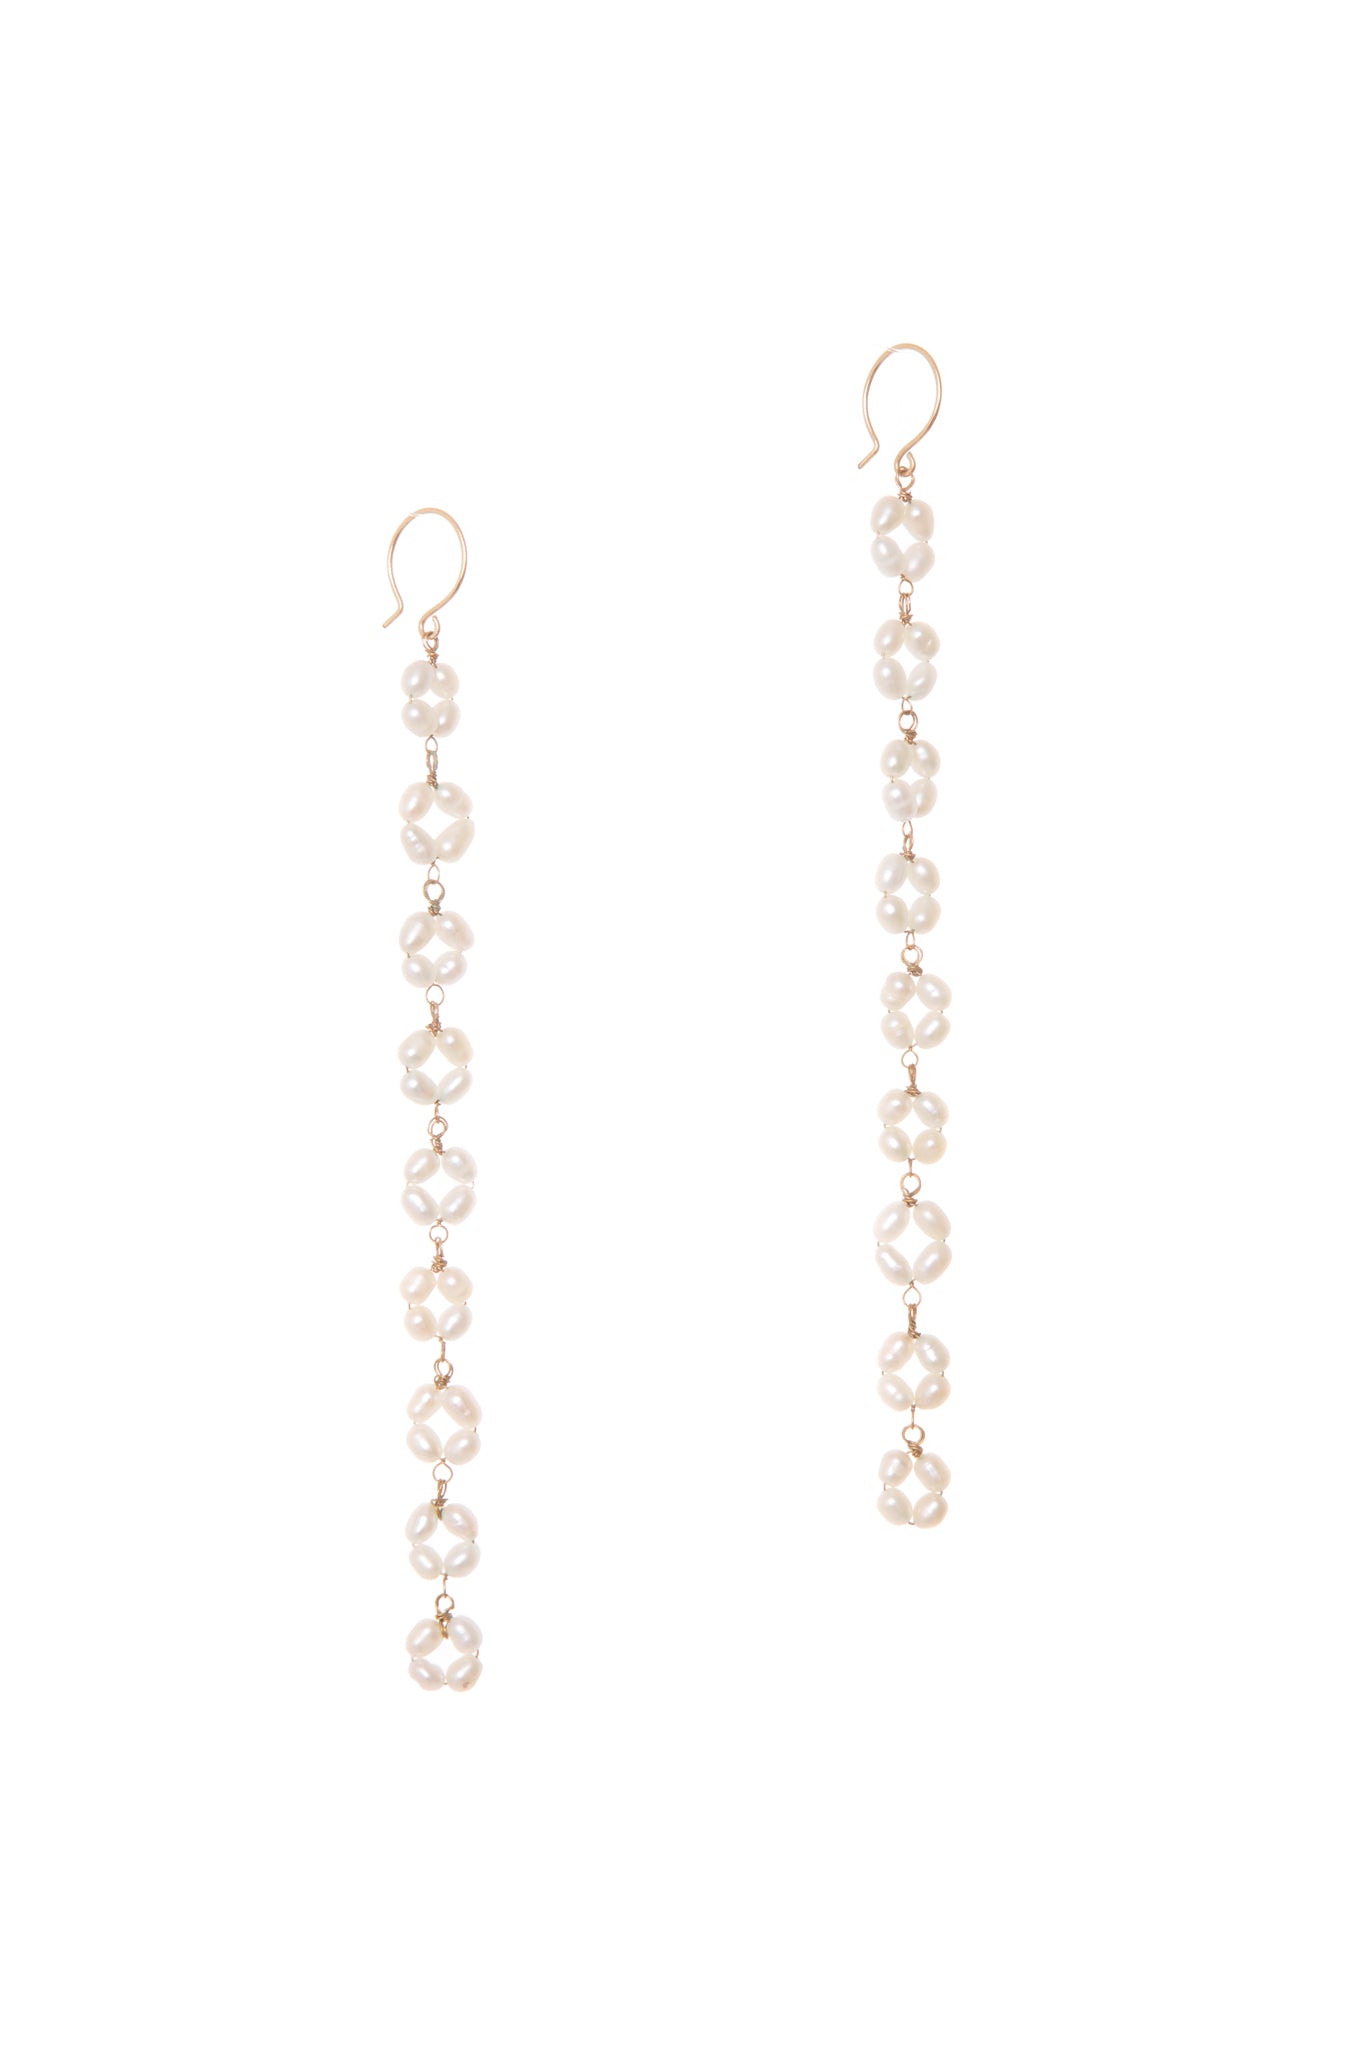 Expertly designed with a draping waterfall effect, these freshwater pearl earrings will add the perfect statement to any bridal look